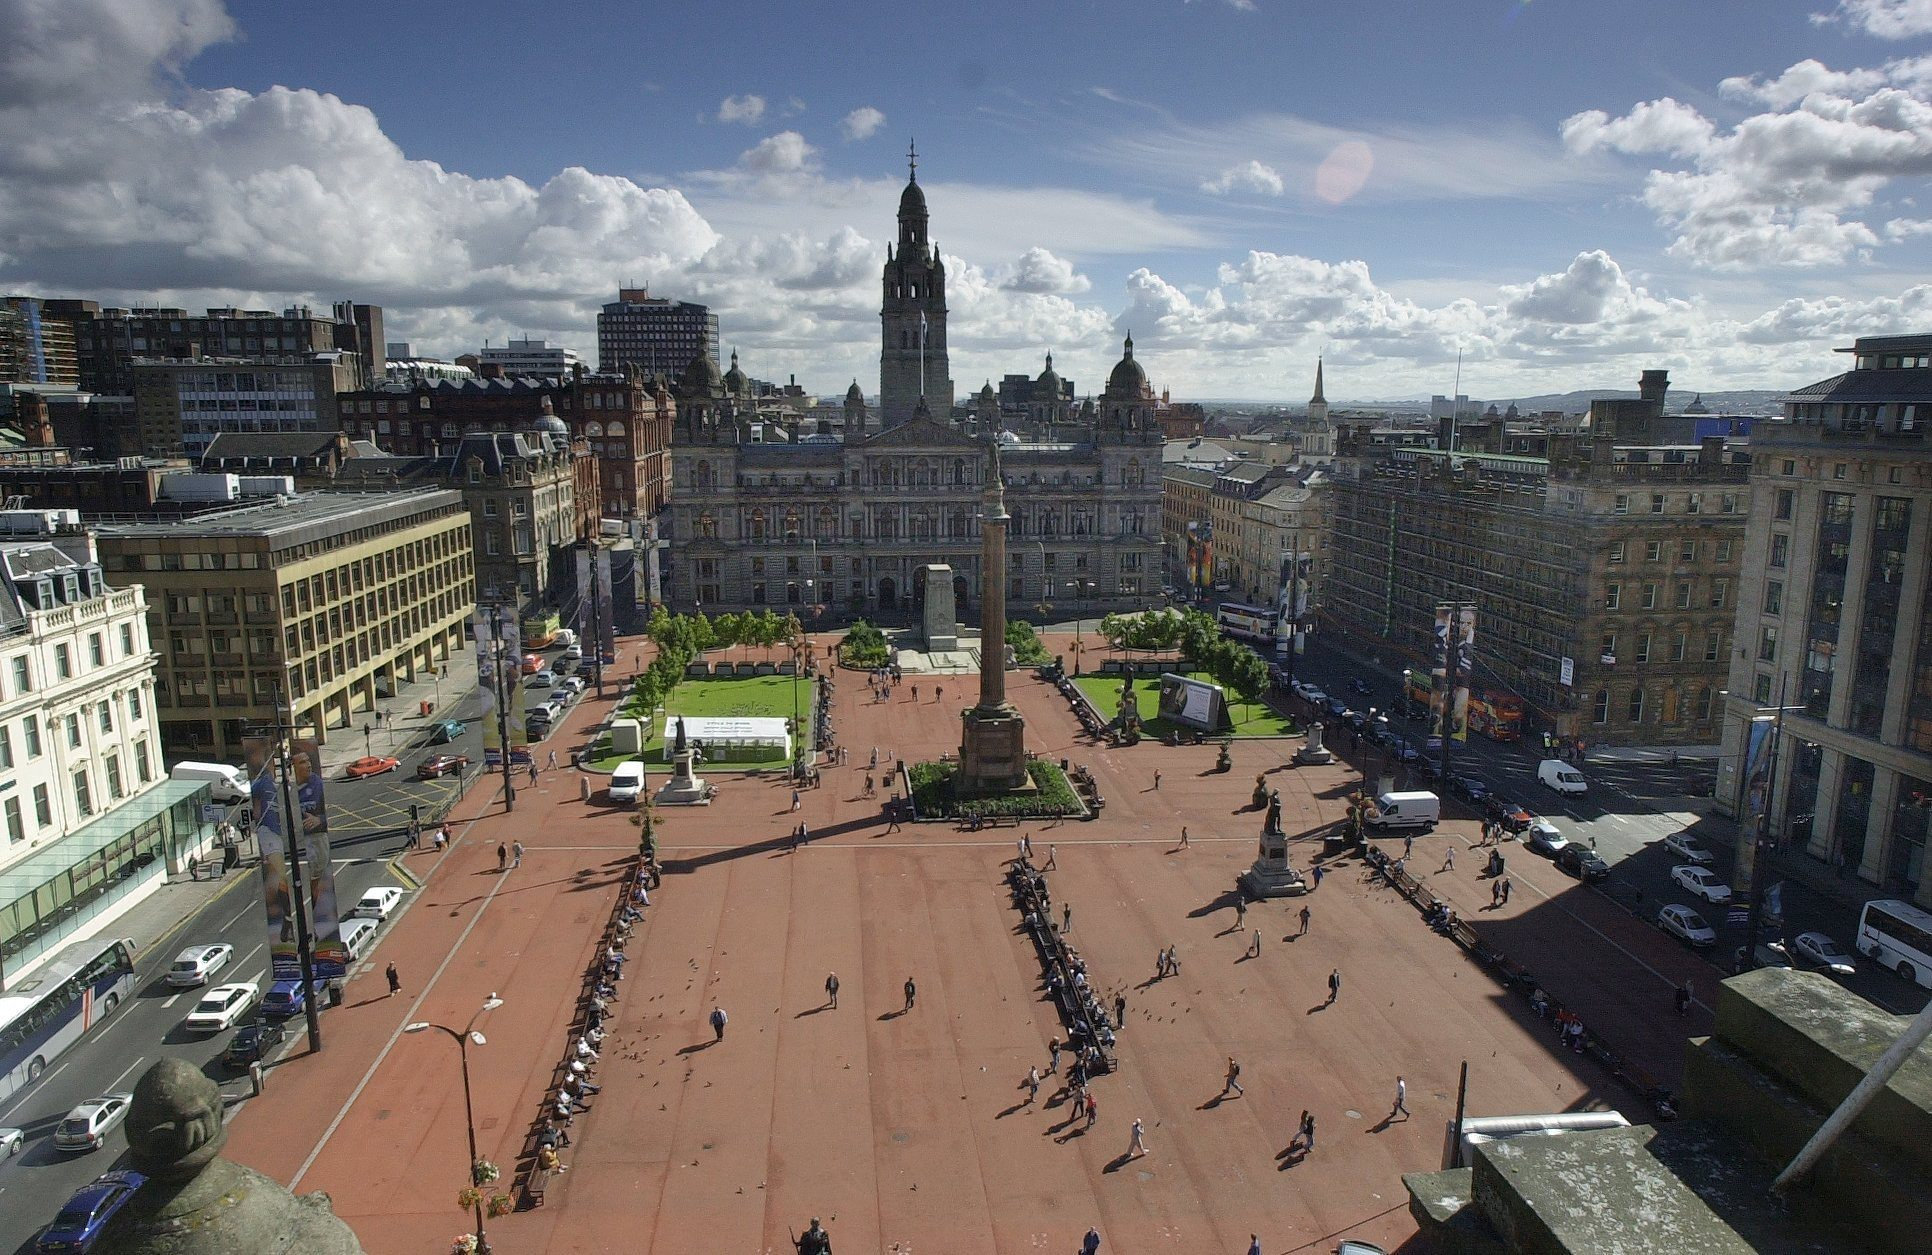 George Square dubbed Red Square due to the colour of the tarmac